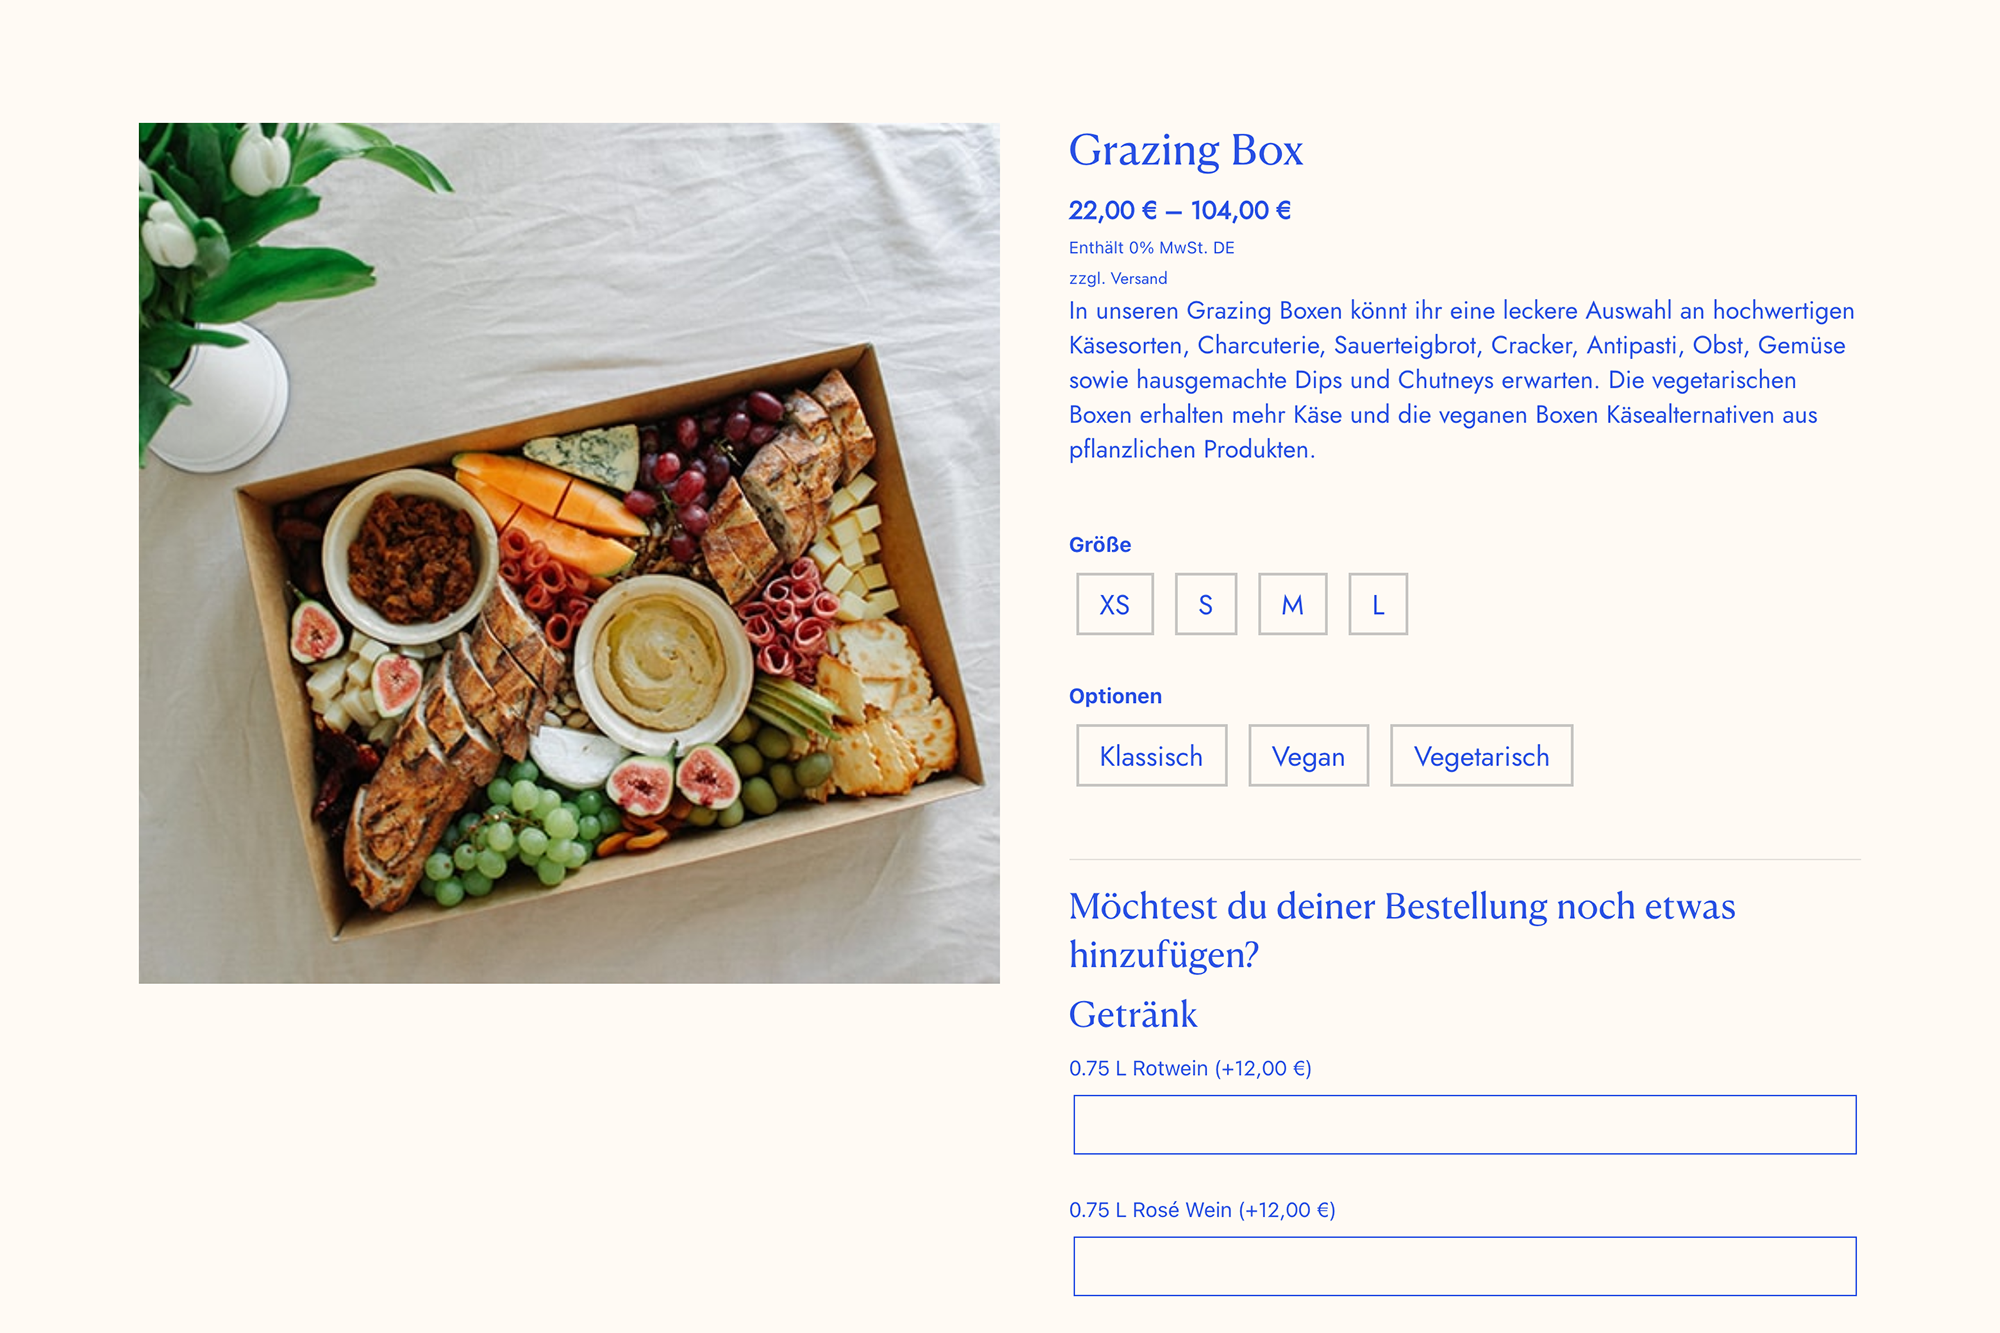 Feasts of Eden catering and food delivery website design and development by NO BORDERS studio